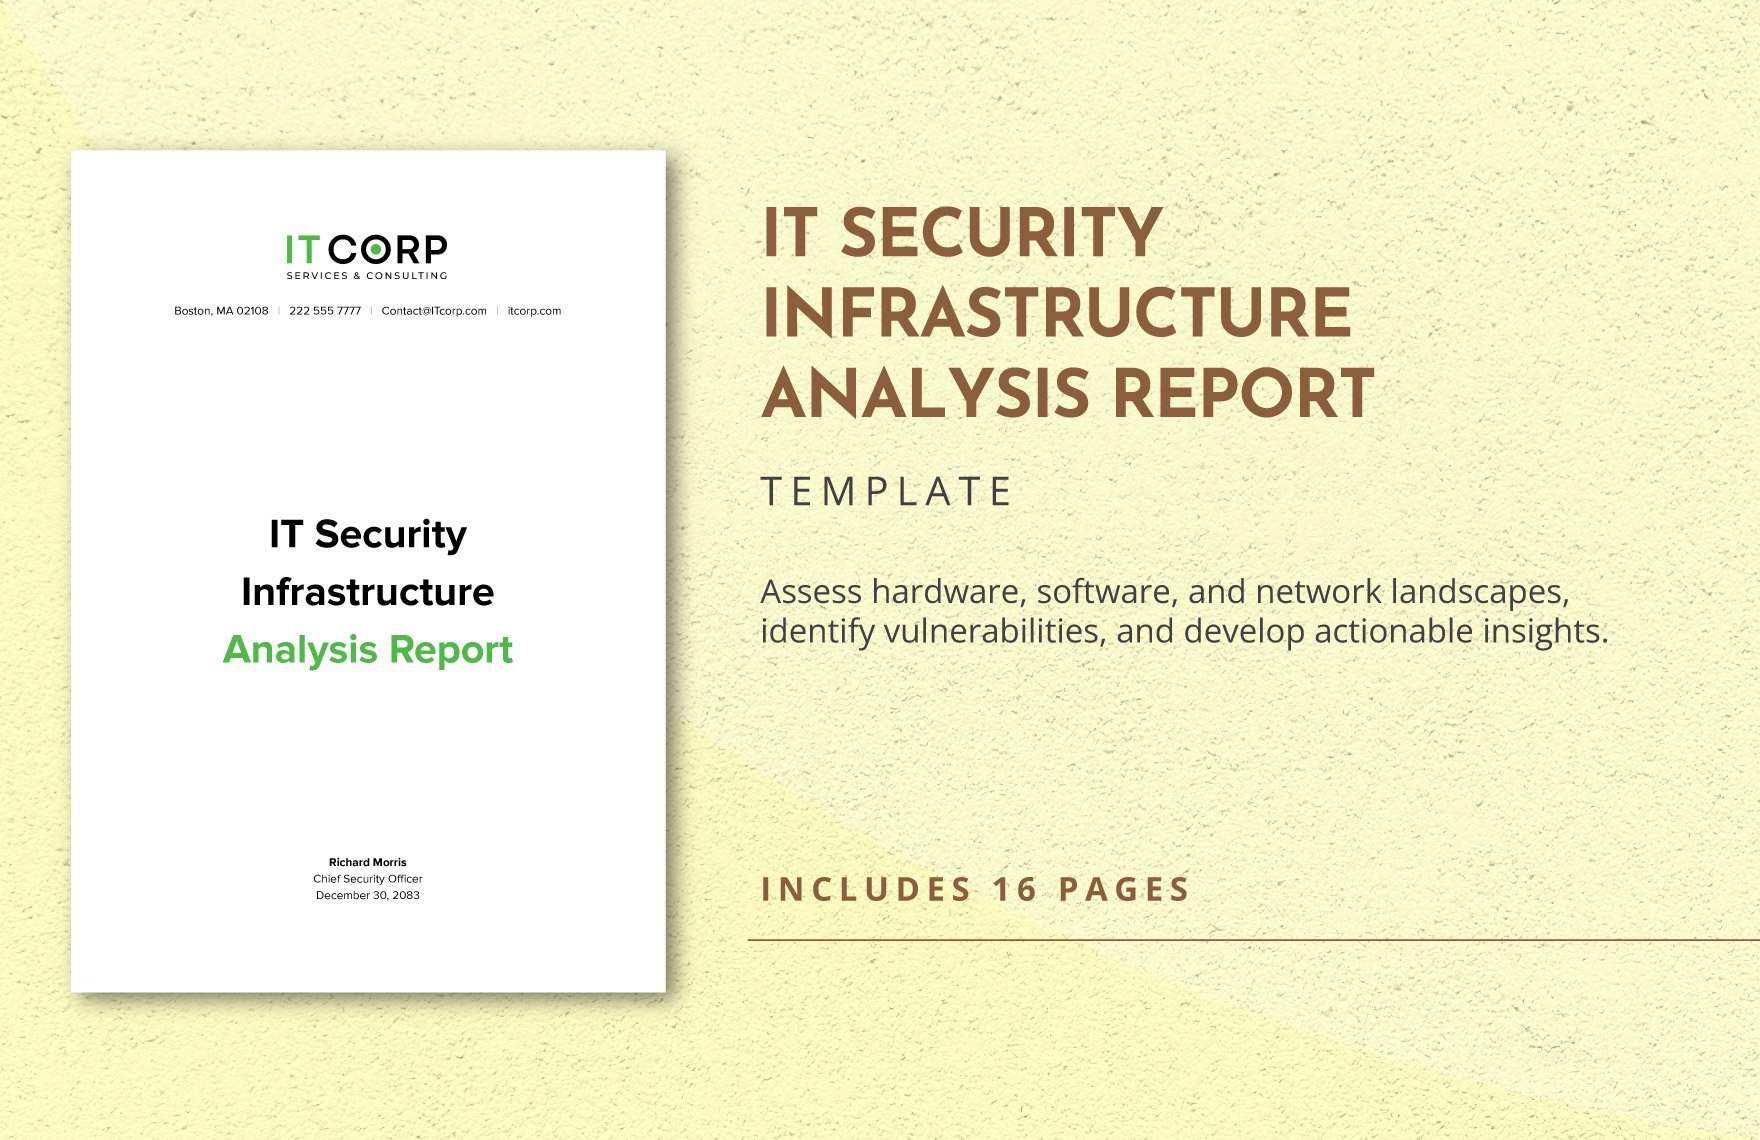 IT Security Infrastructure Analysis Report Template